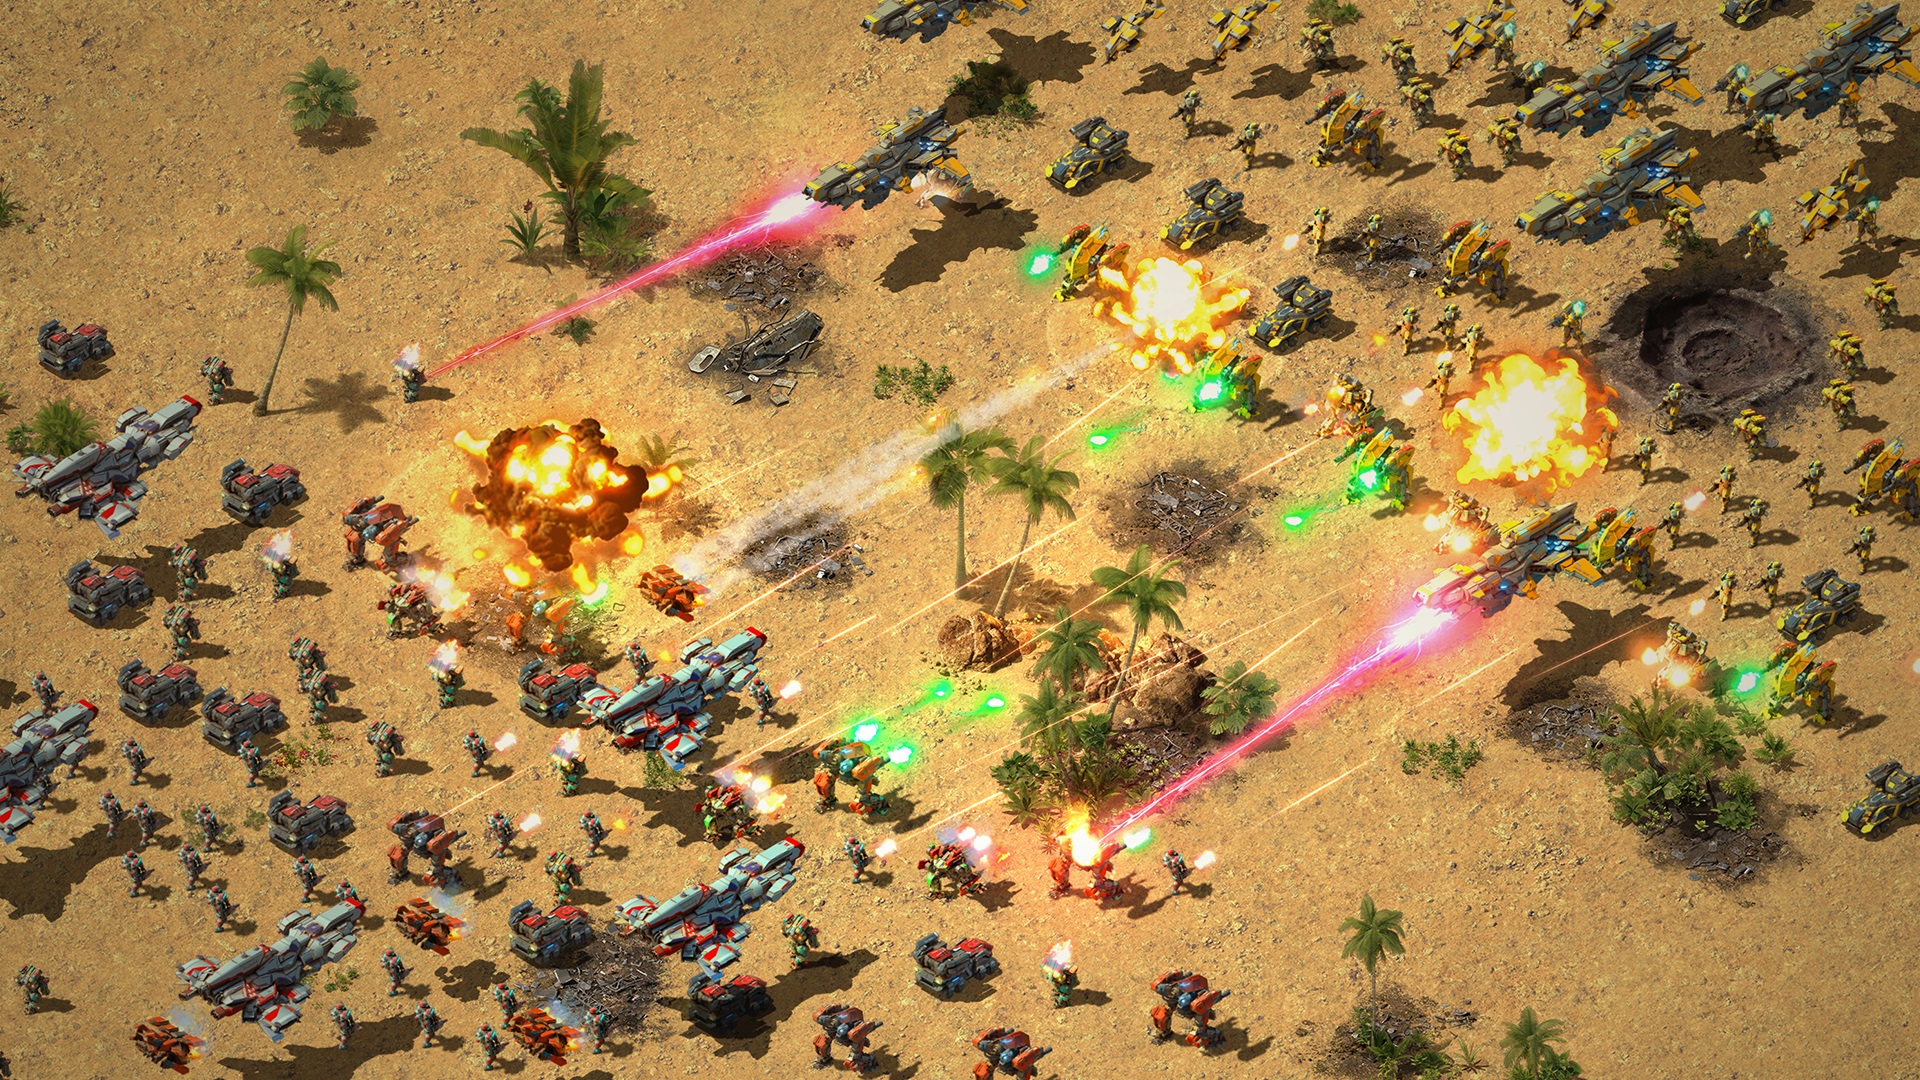 Battle for the Galaxy - gra strategia MMORTS o robotach